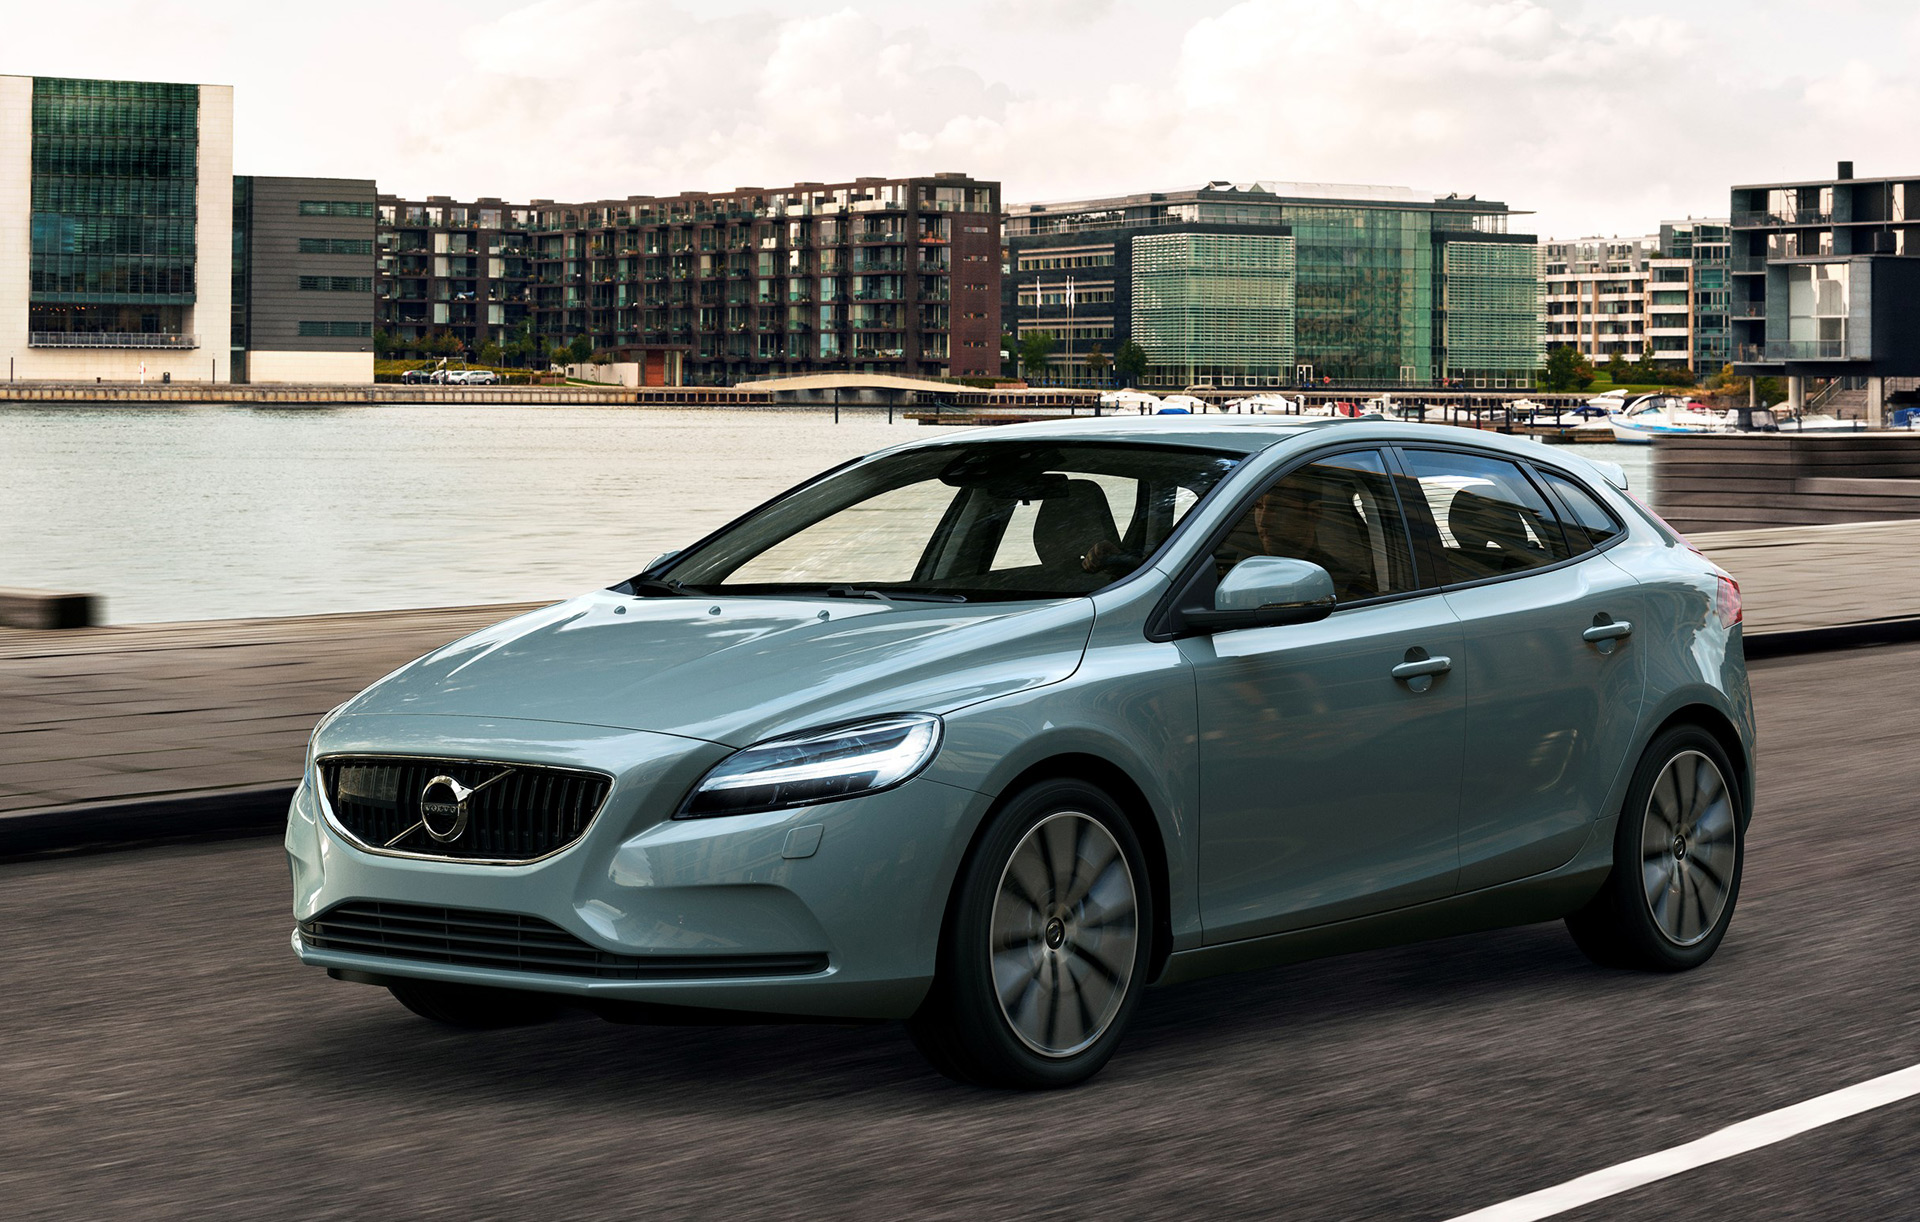 Volvo V40 hatch will likely be replaced by a crossover